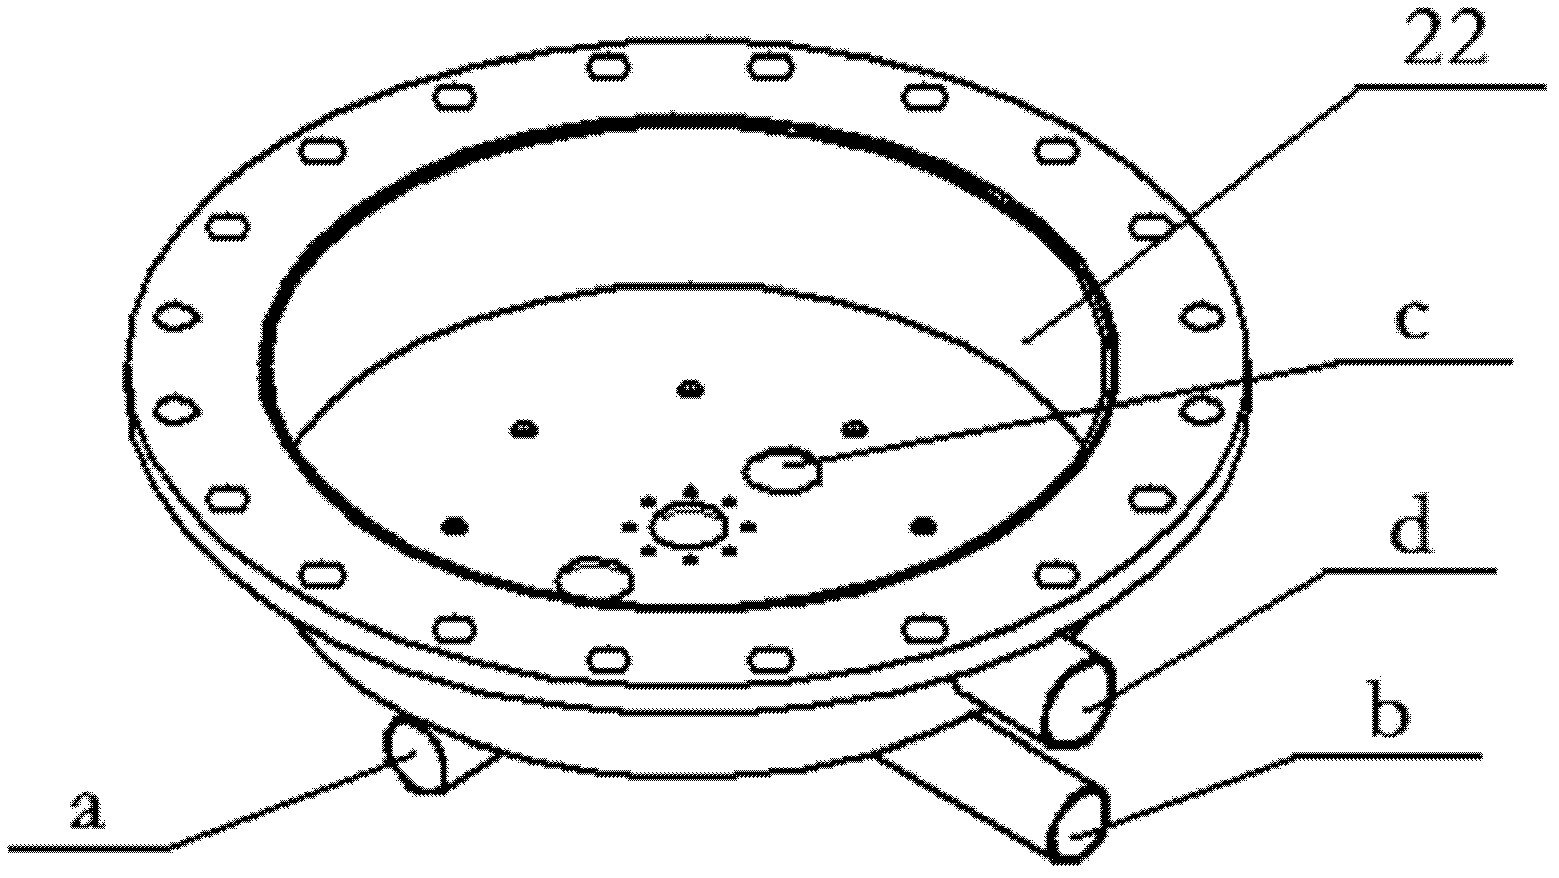 Ring-shaped fluidized bed reactor